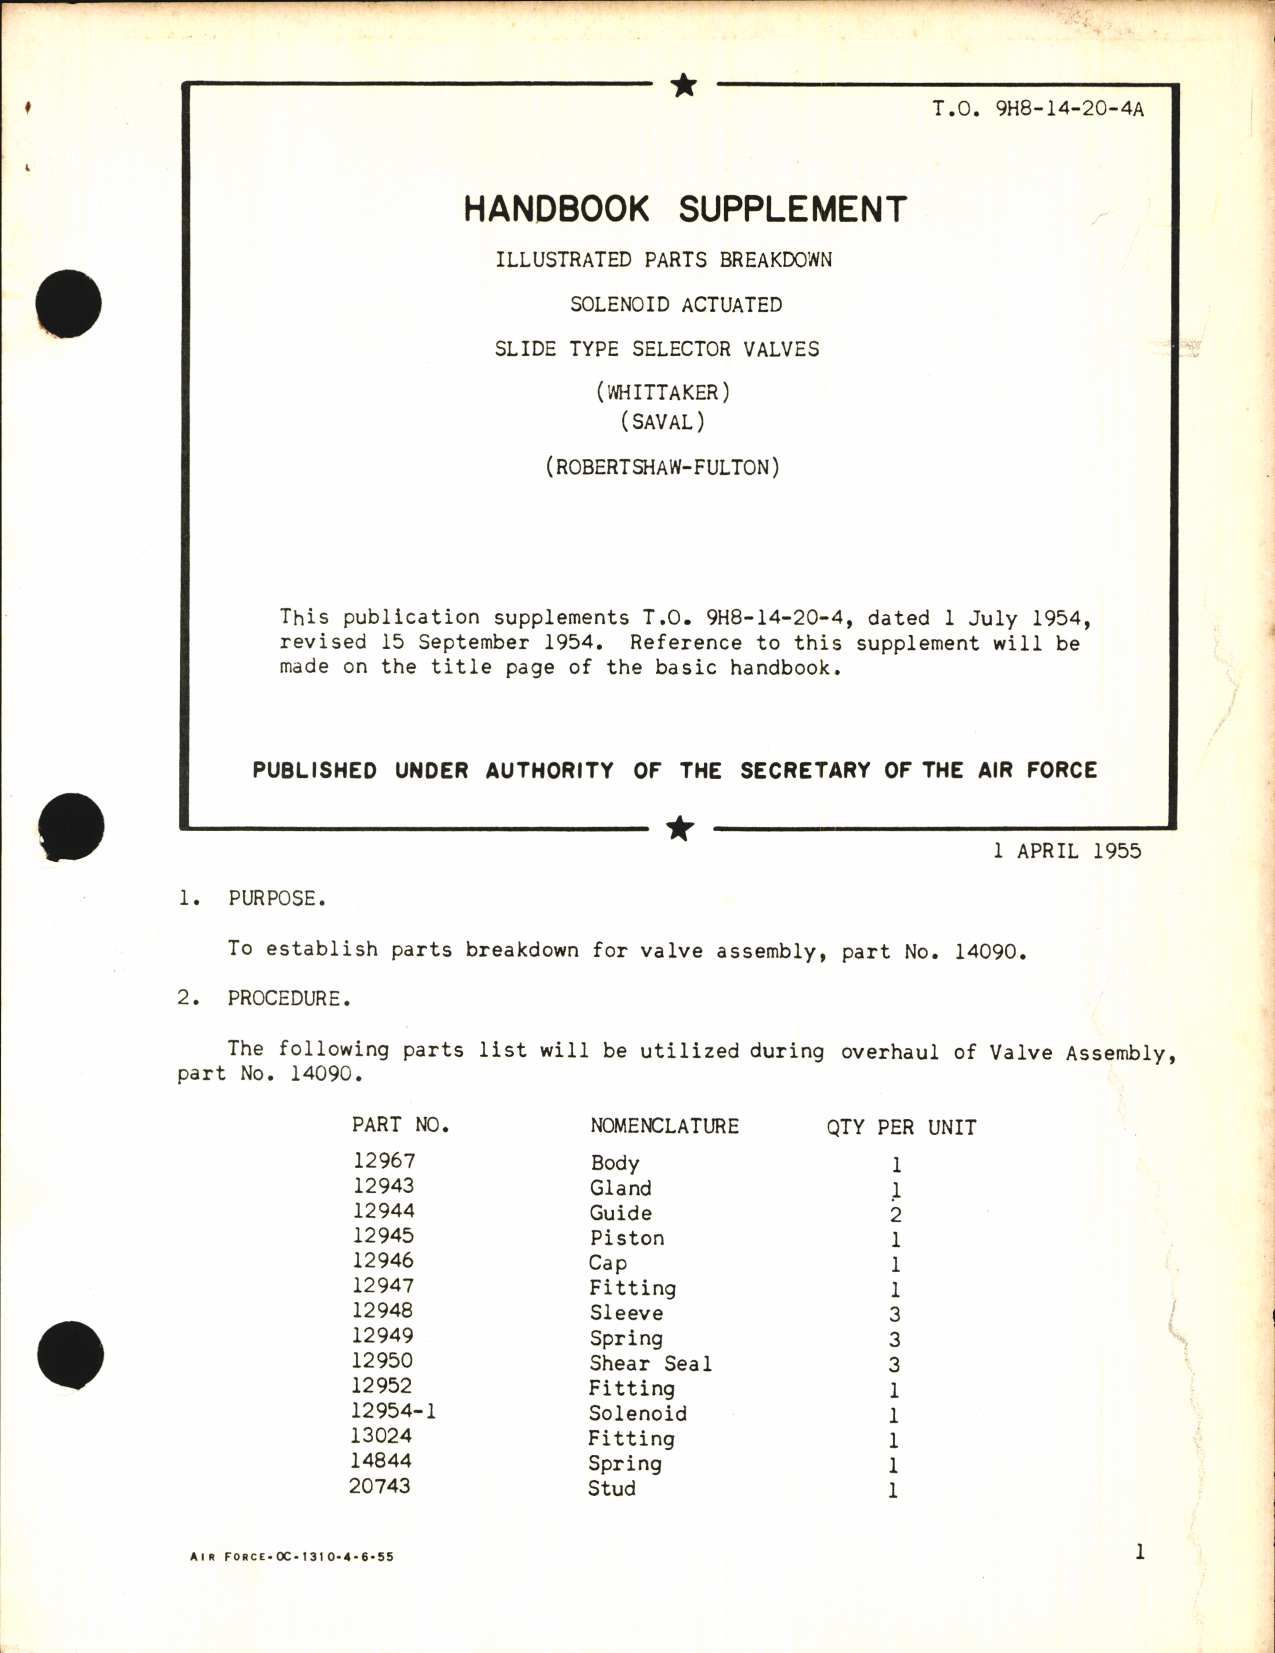 Sample page 1 from AirCorps Library document: Handbook Supplement of Illustrated Parts Breakdown for Solenoid Actuated Slide type Selector Valves 